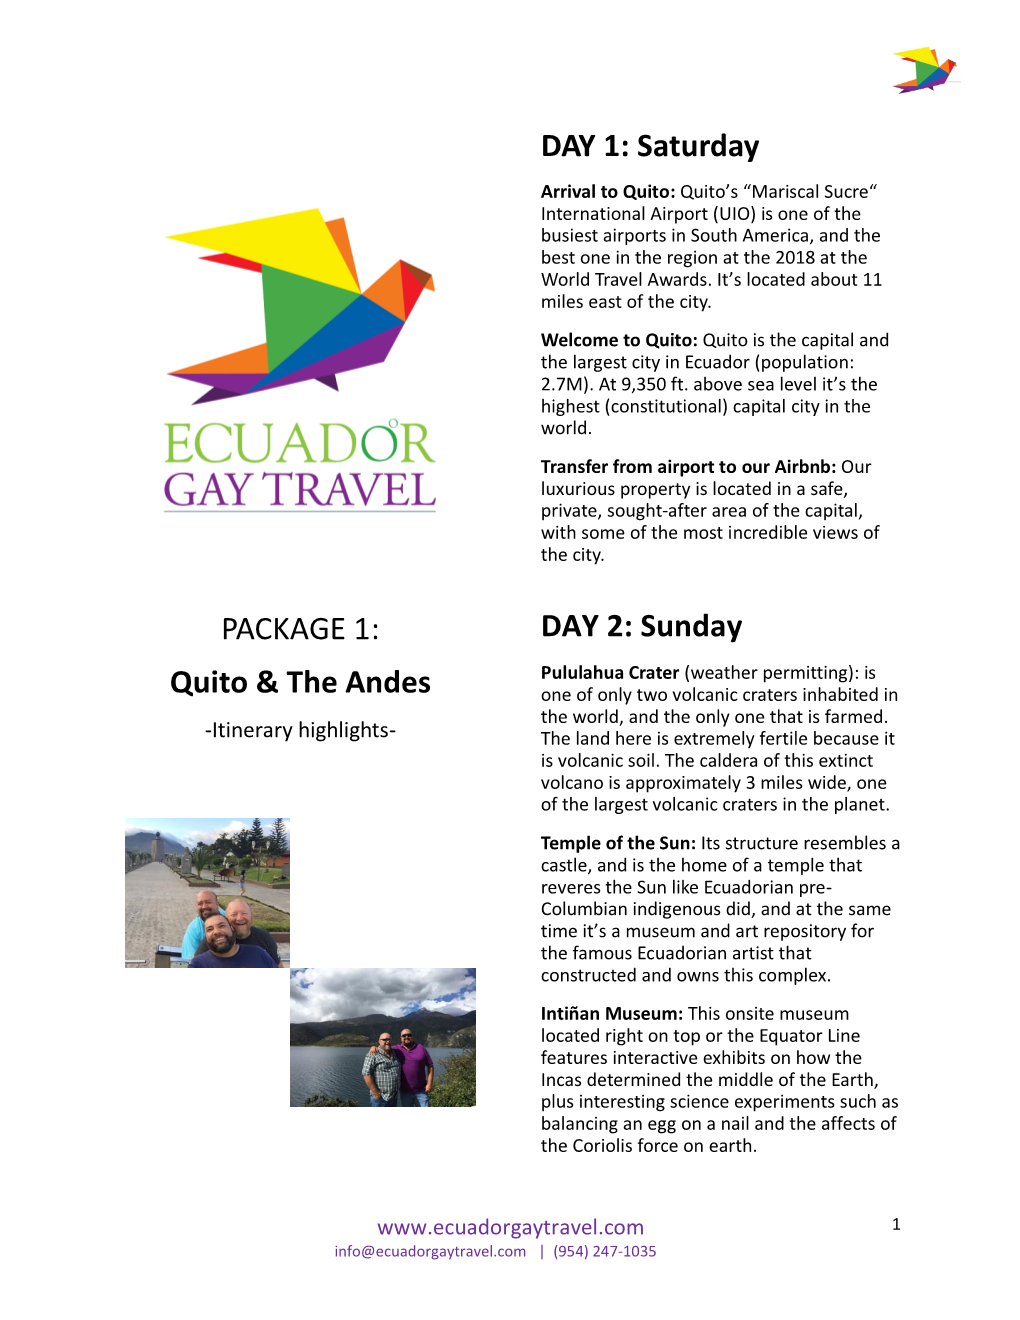 PACKAGE 1: Quito & the Andes DAY 1